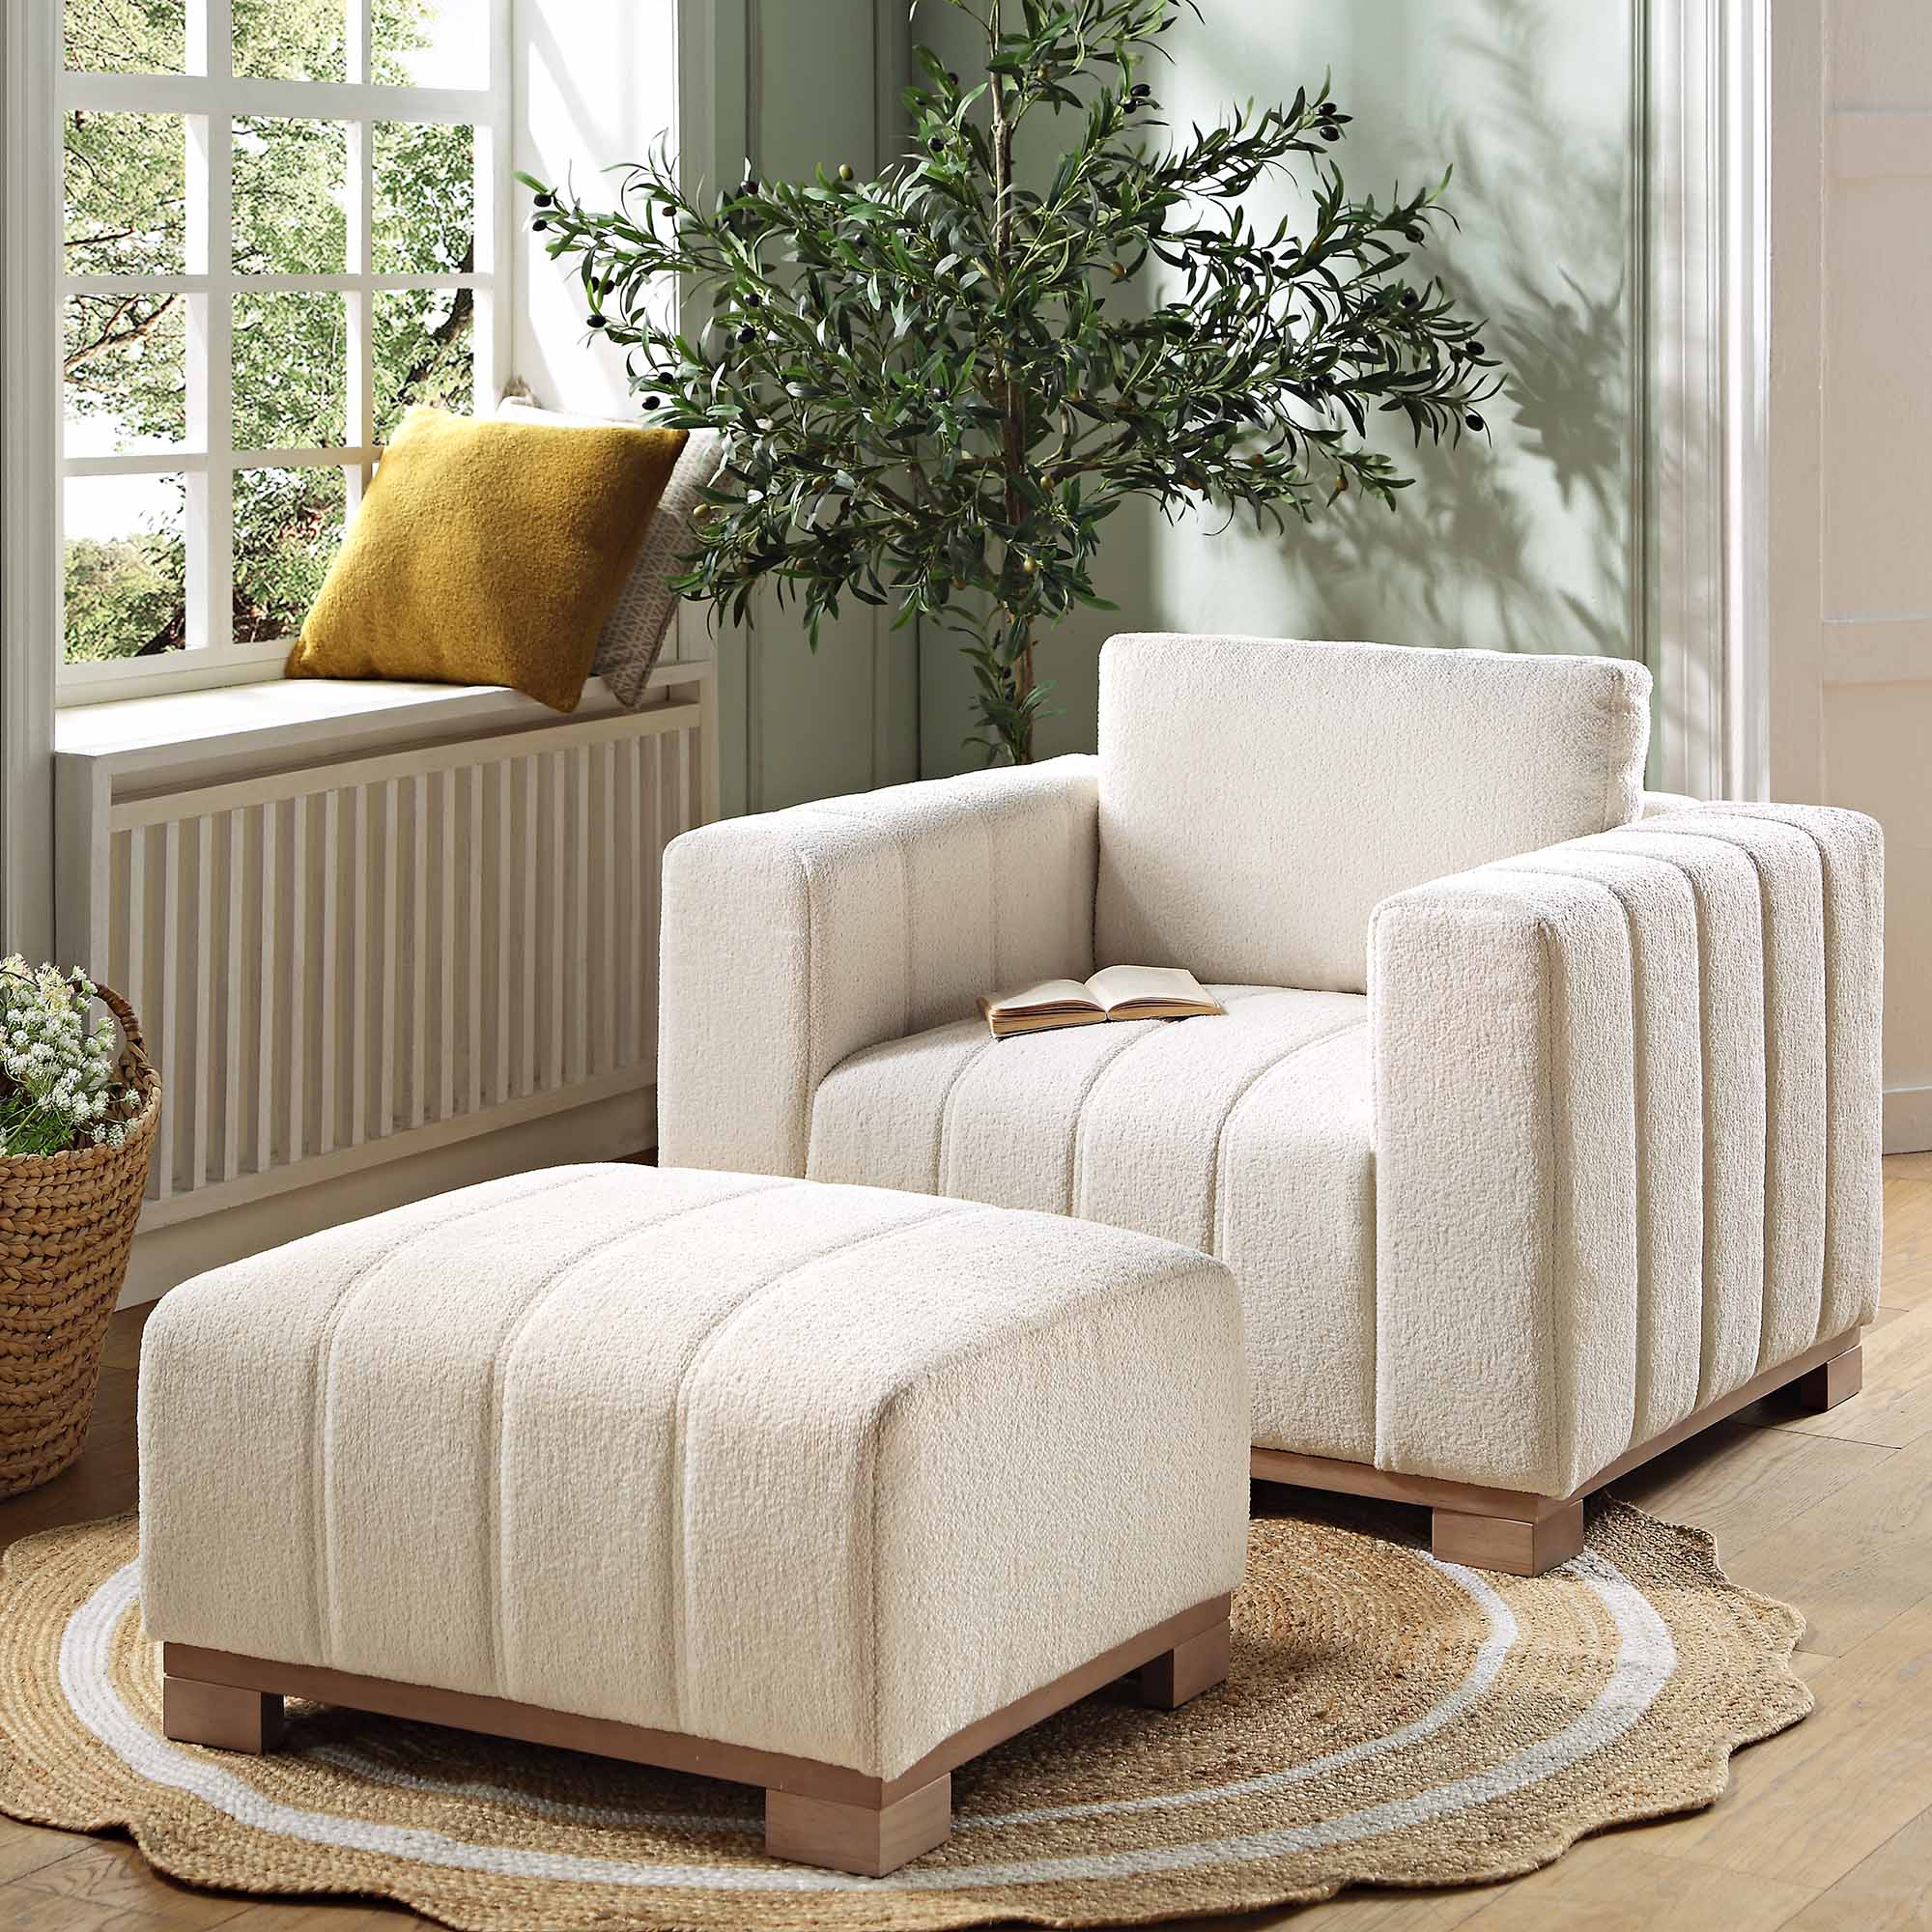 Belsize Beige Boucle Sofa with Wooden Base, 1-Seater